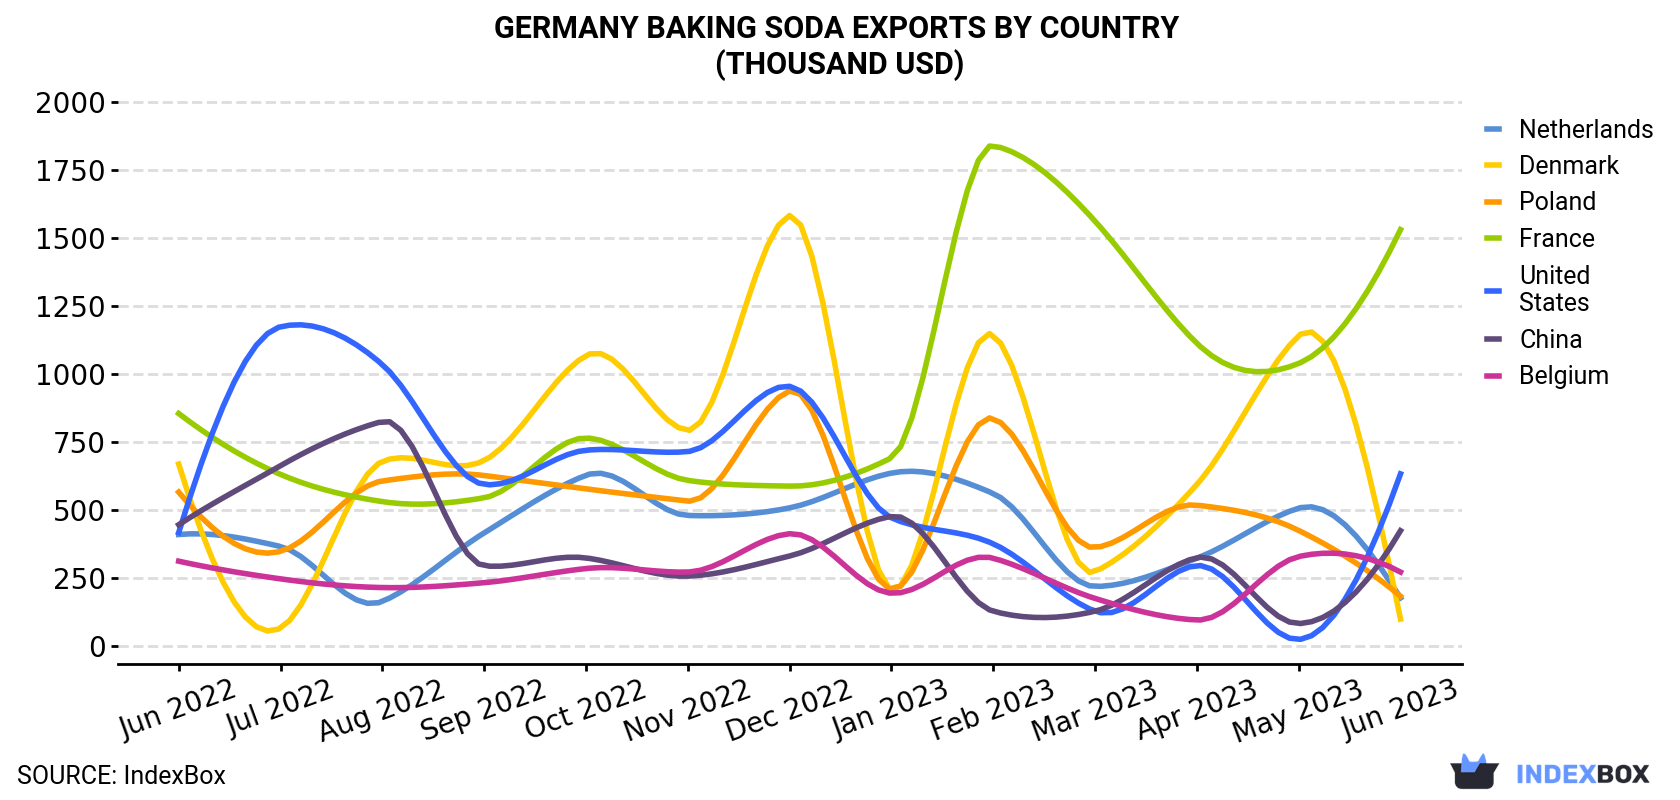 Germany Baking Soda Exports By Country (Thousand USD)